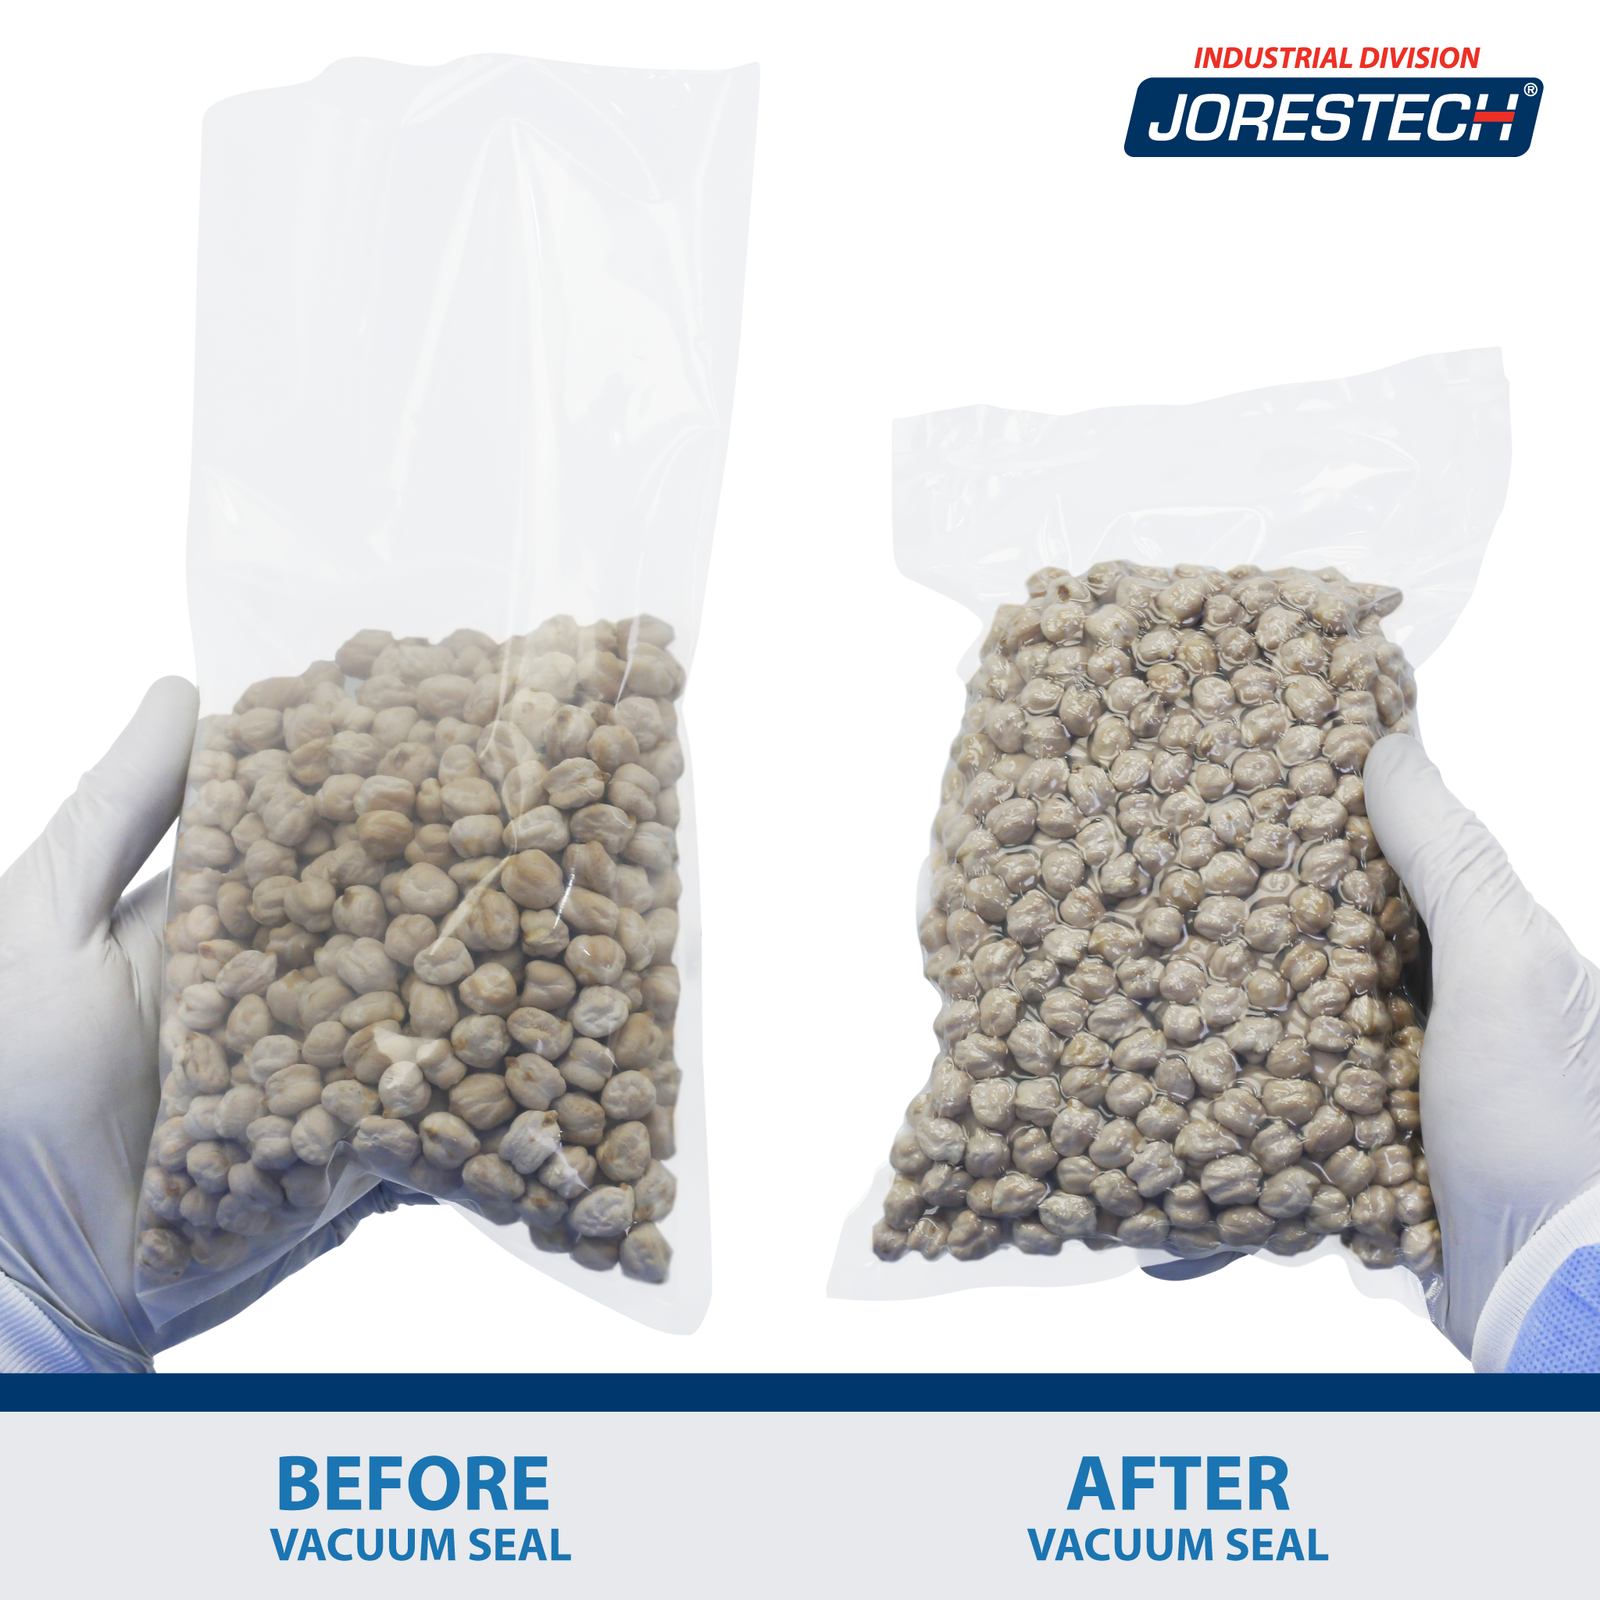 To the left, an open bag with chic peas inside. Text below reds: before vacuum seal. To the right of the image the same bag of chic peas vacuum sealed, text reads: after vacuum seal. The bag is now vacuum sealed and the chic peas look neatly packed and very compacted